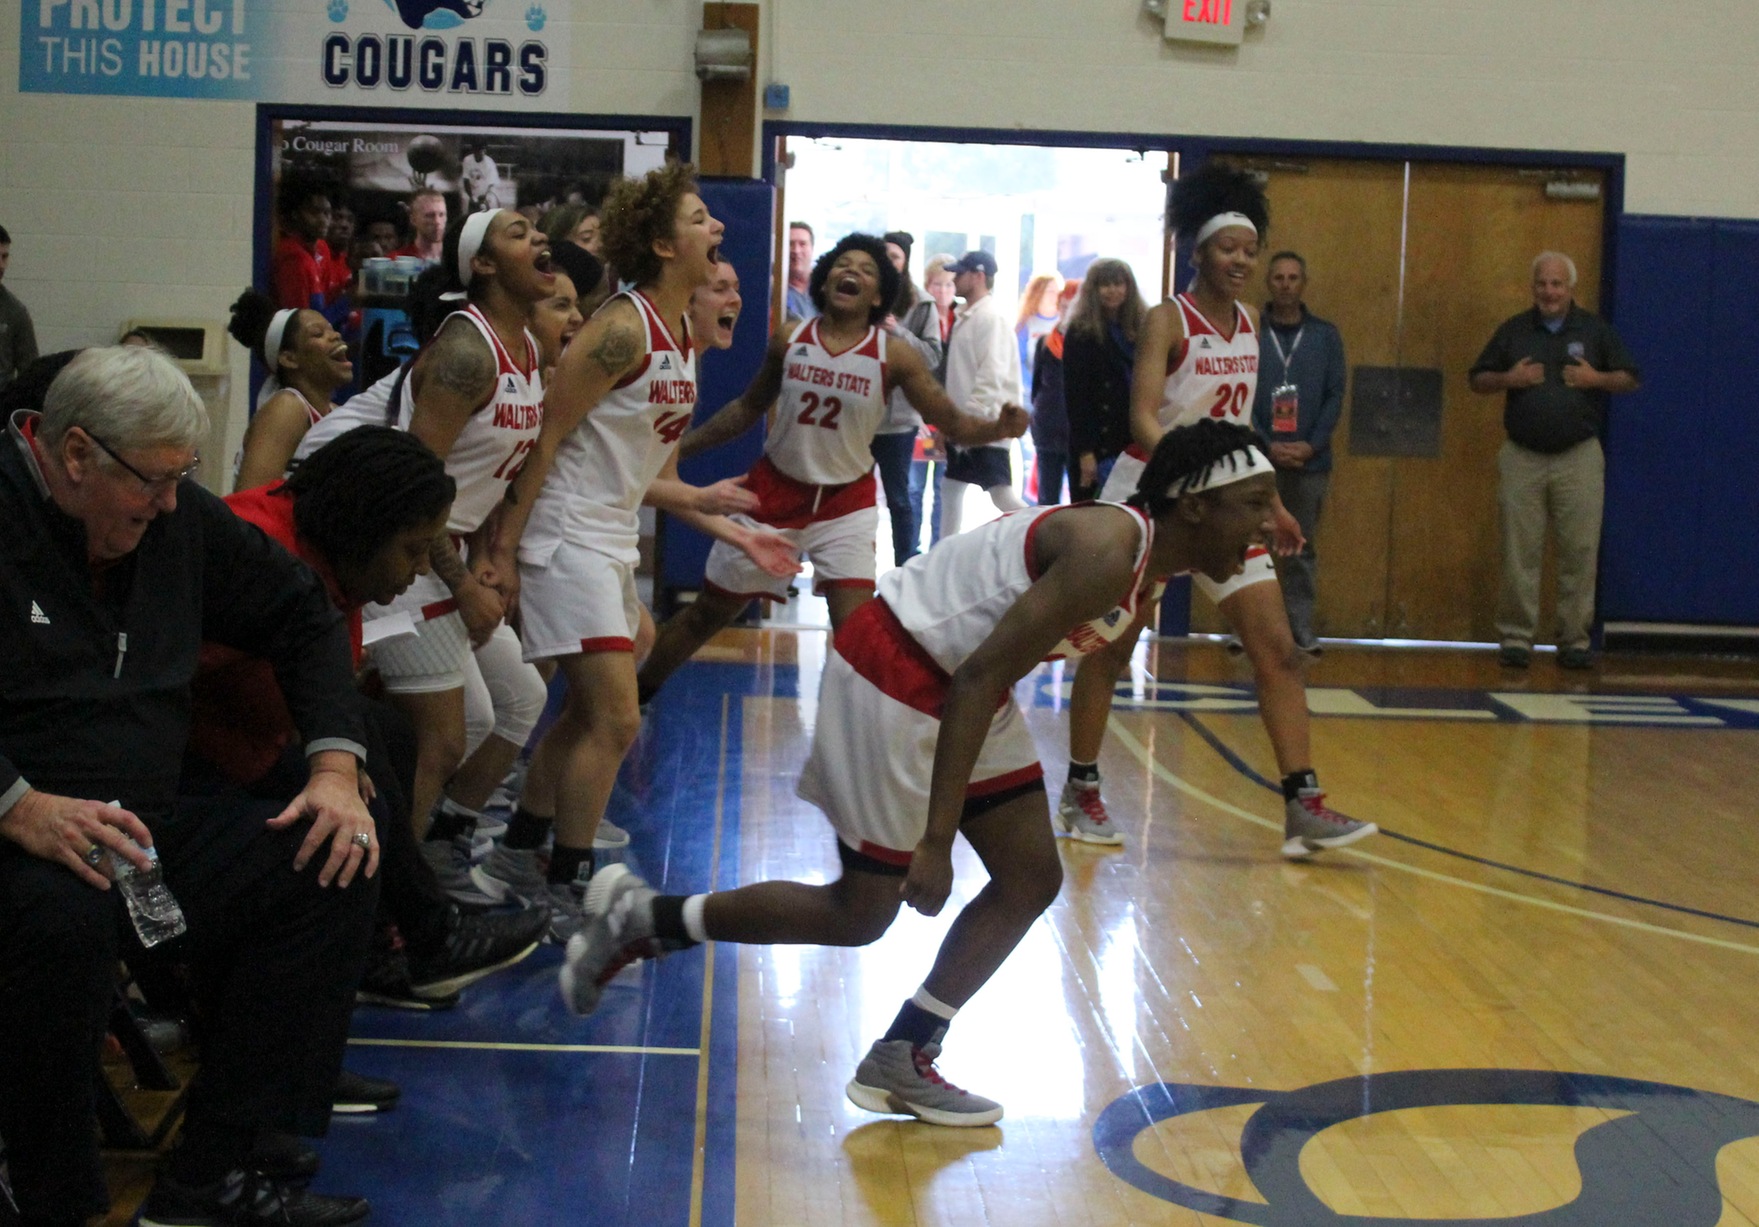 #1 Walters State Captures TCCAA Women's Basketball Title